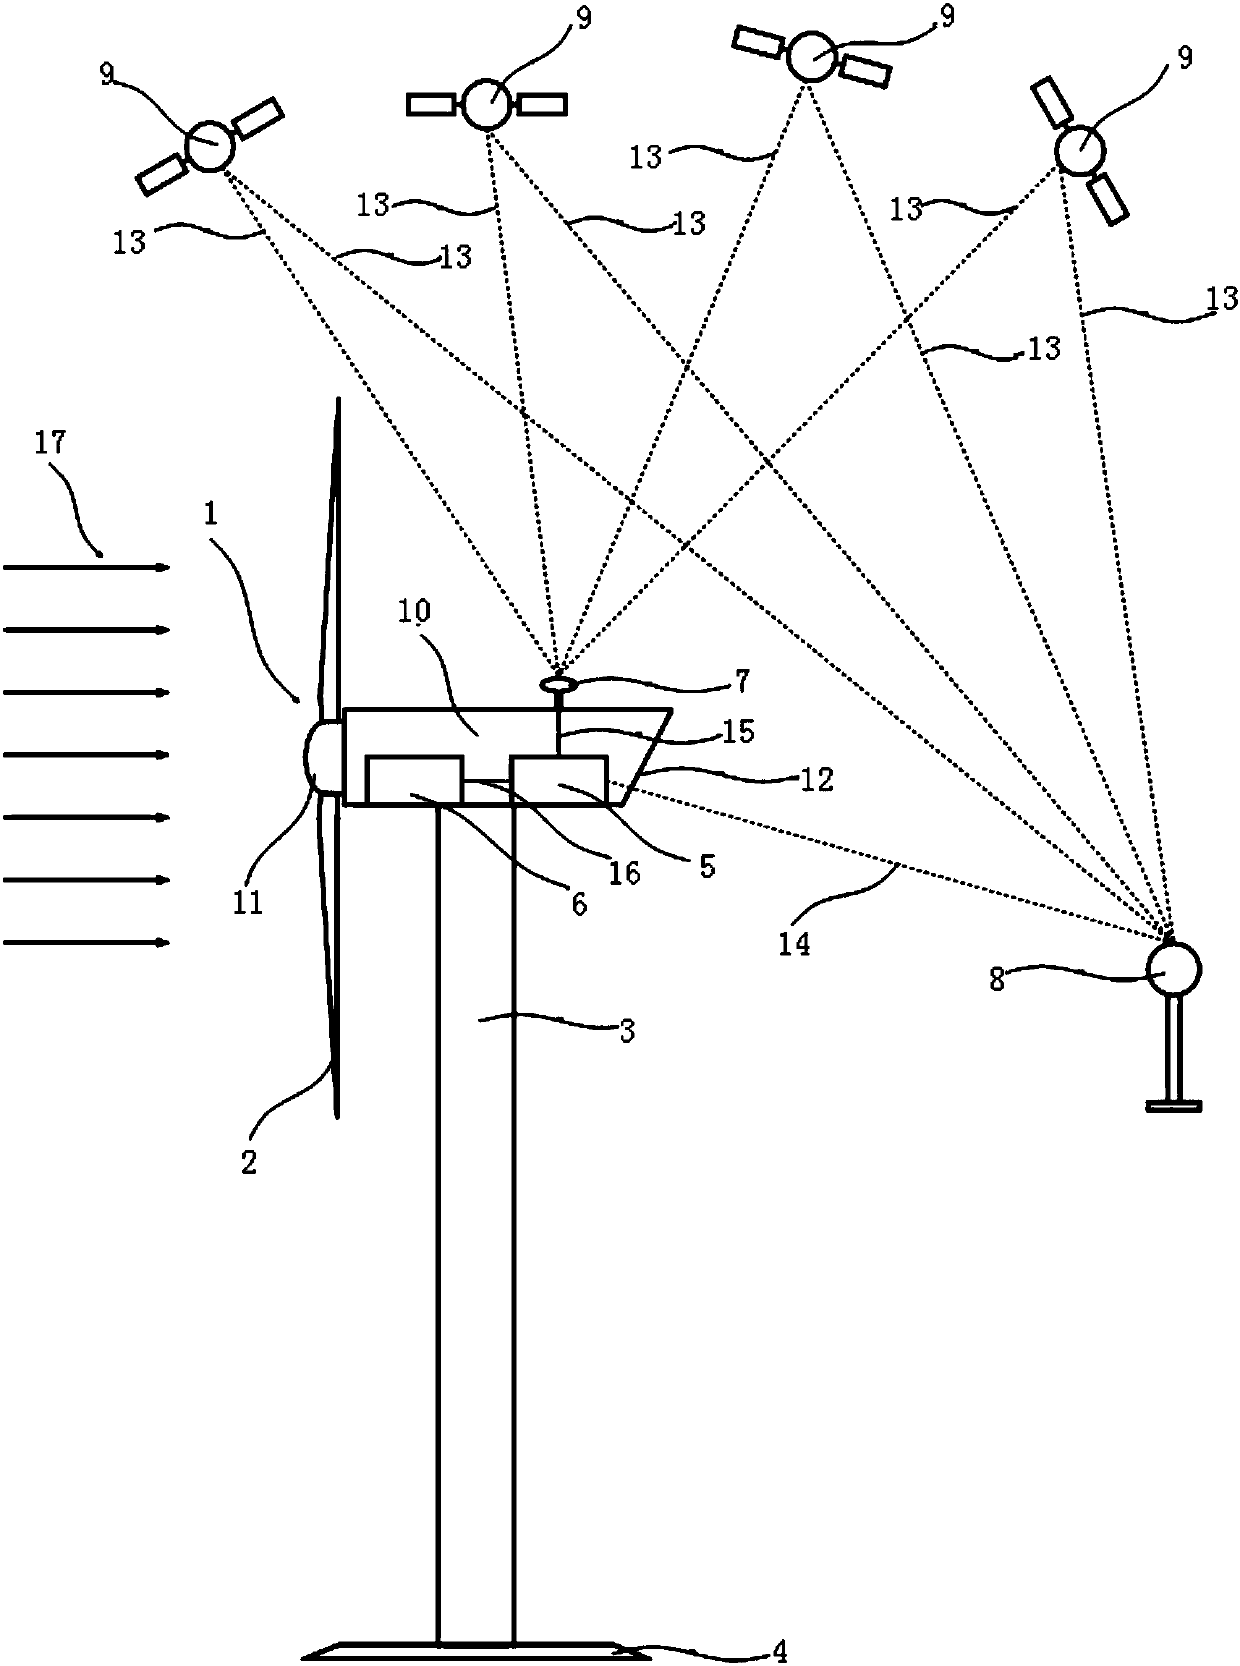 Cabin thrust and foundation settlement real-time monitoring system and monitoring method for wind turbine